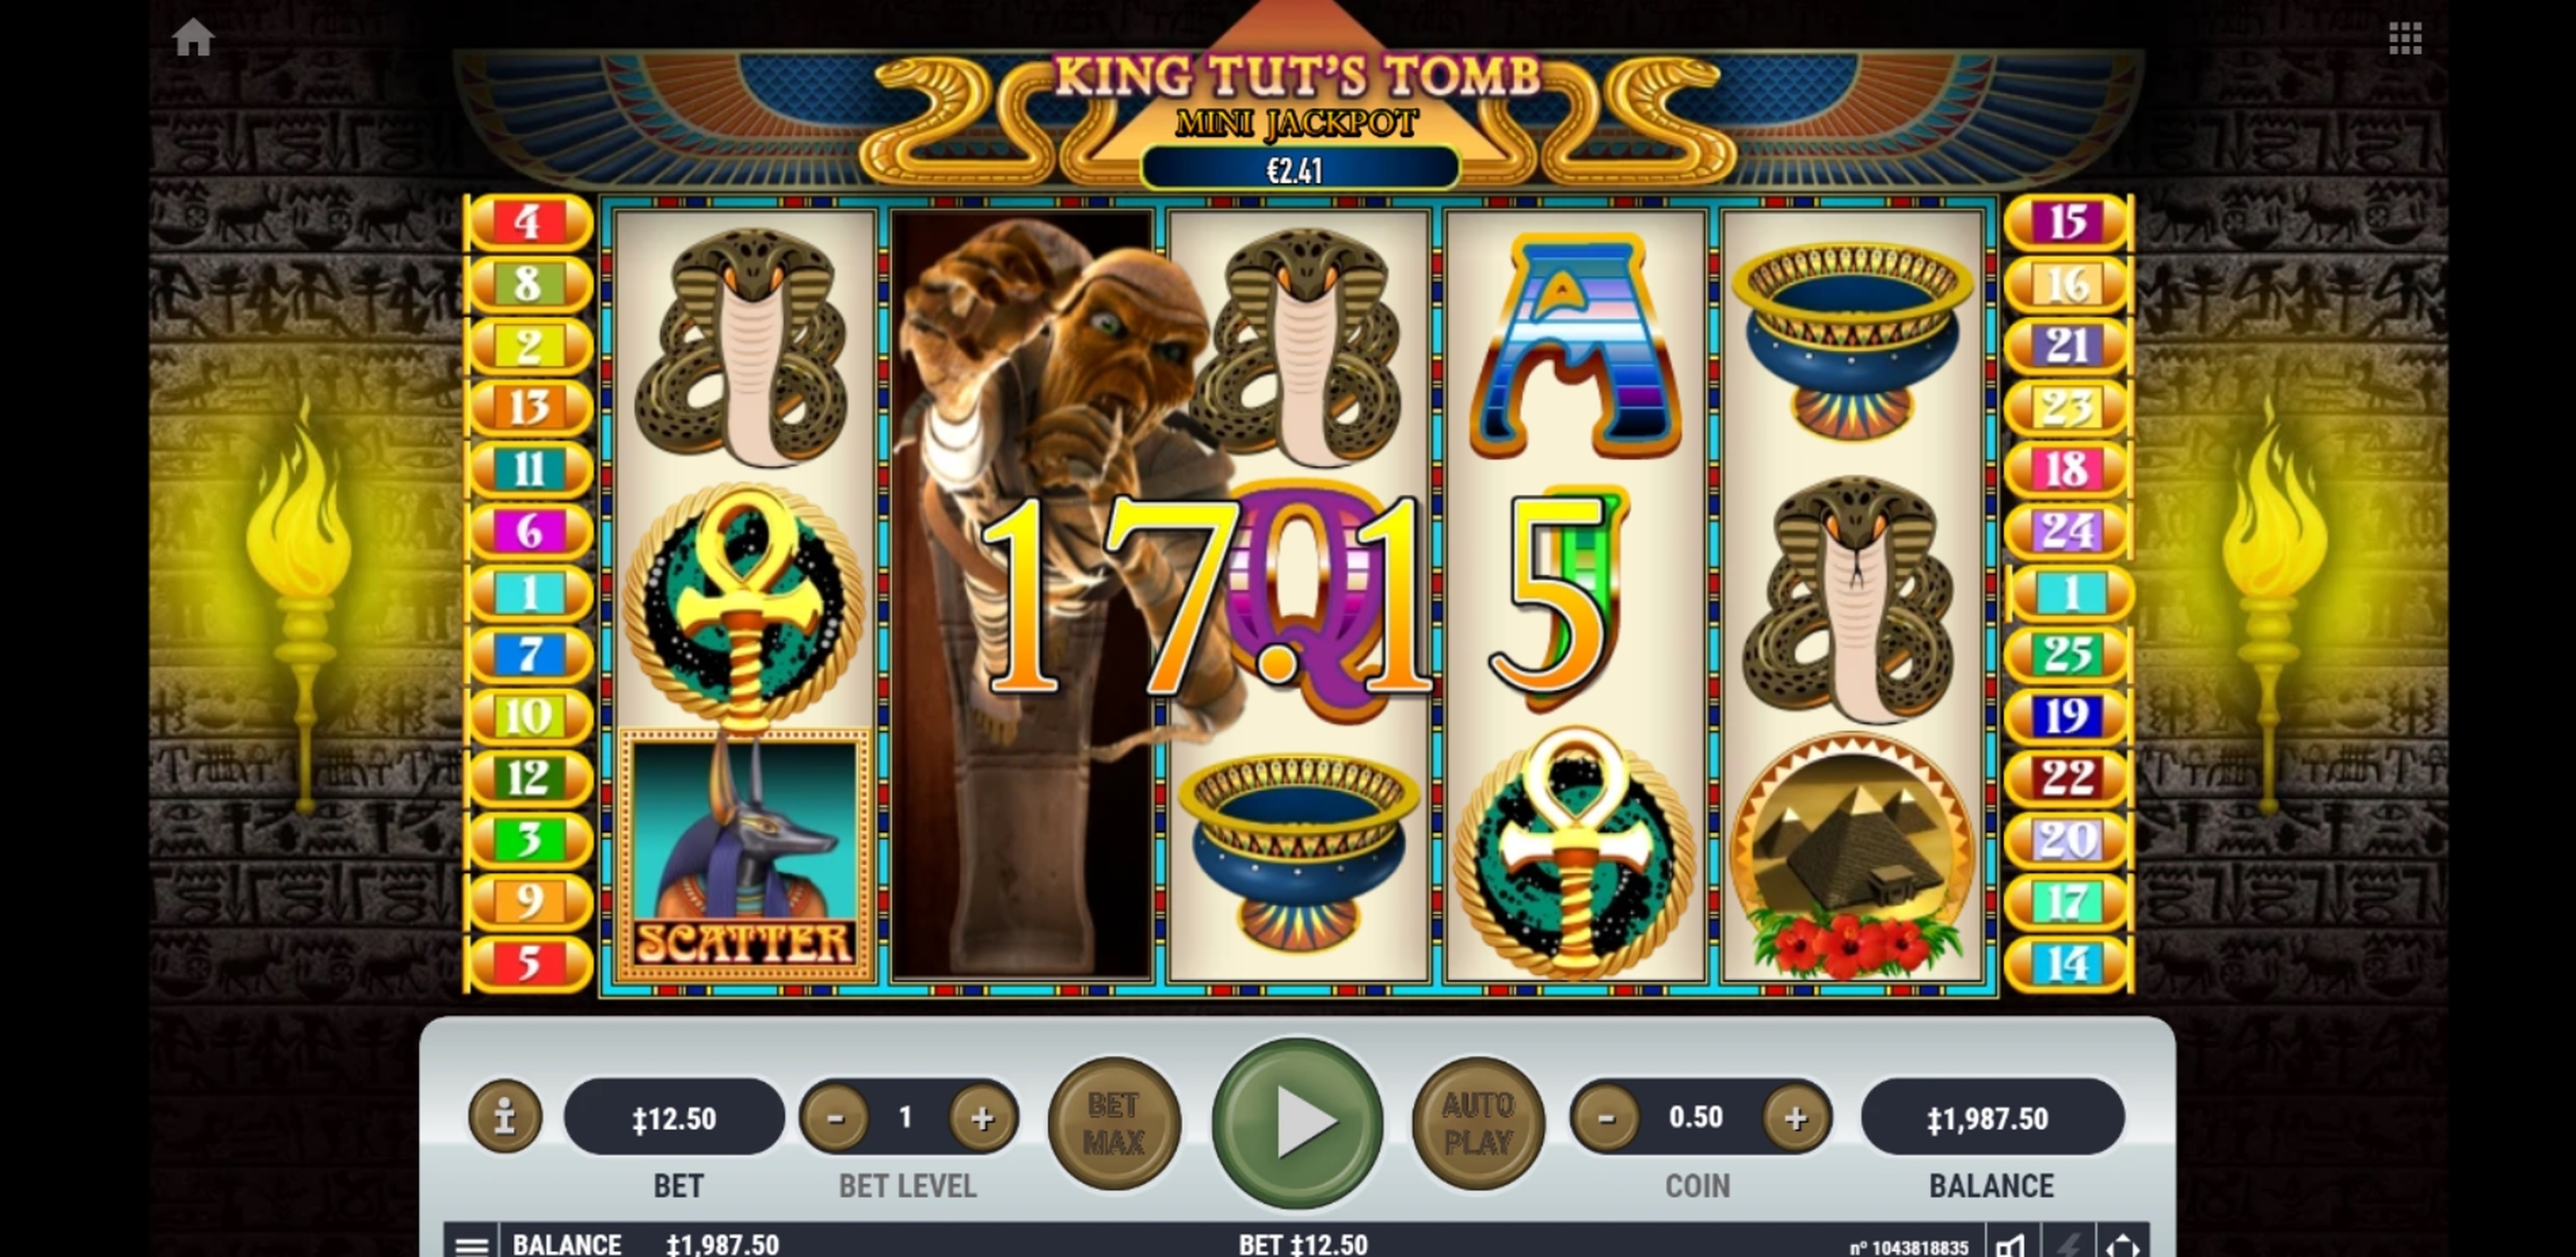 Win Money in King Tut's Tomb Free Slot Game by Habanero